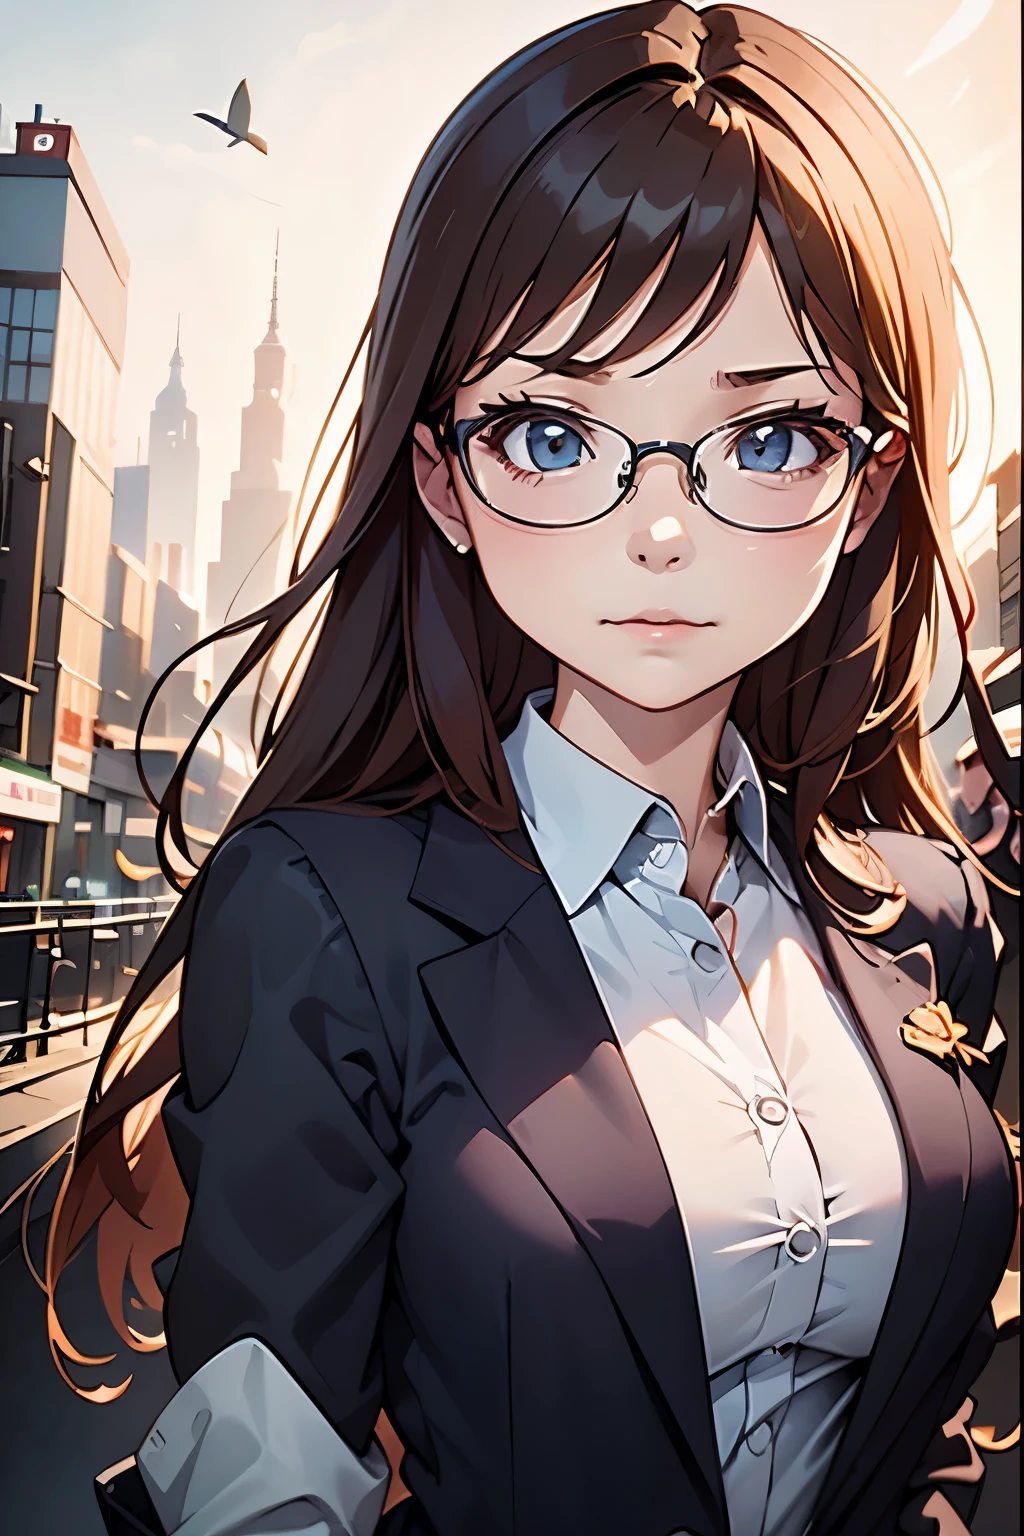 (disorganized, High resolution, Super detailed, realistic, ), 1 girl,mature, alone, long brown hair 、((business suit)),brown eyes,  (Glasseodern city background, Super detailedな, highest quality, Detail view, vectorized, 8K,  graphic design, vector lines, Full HD，whole body